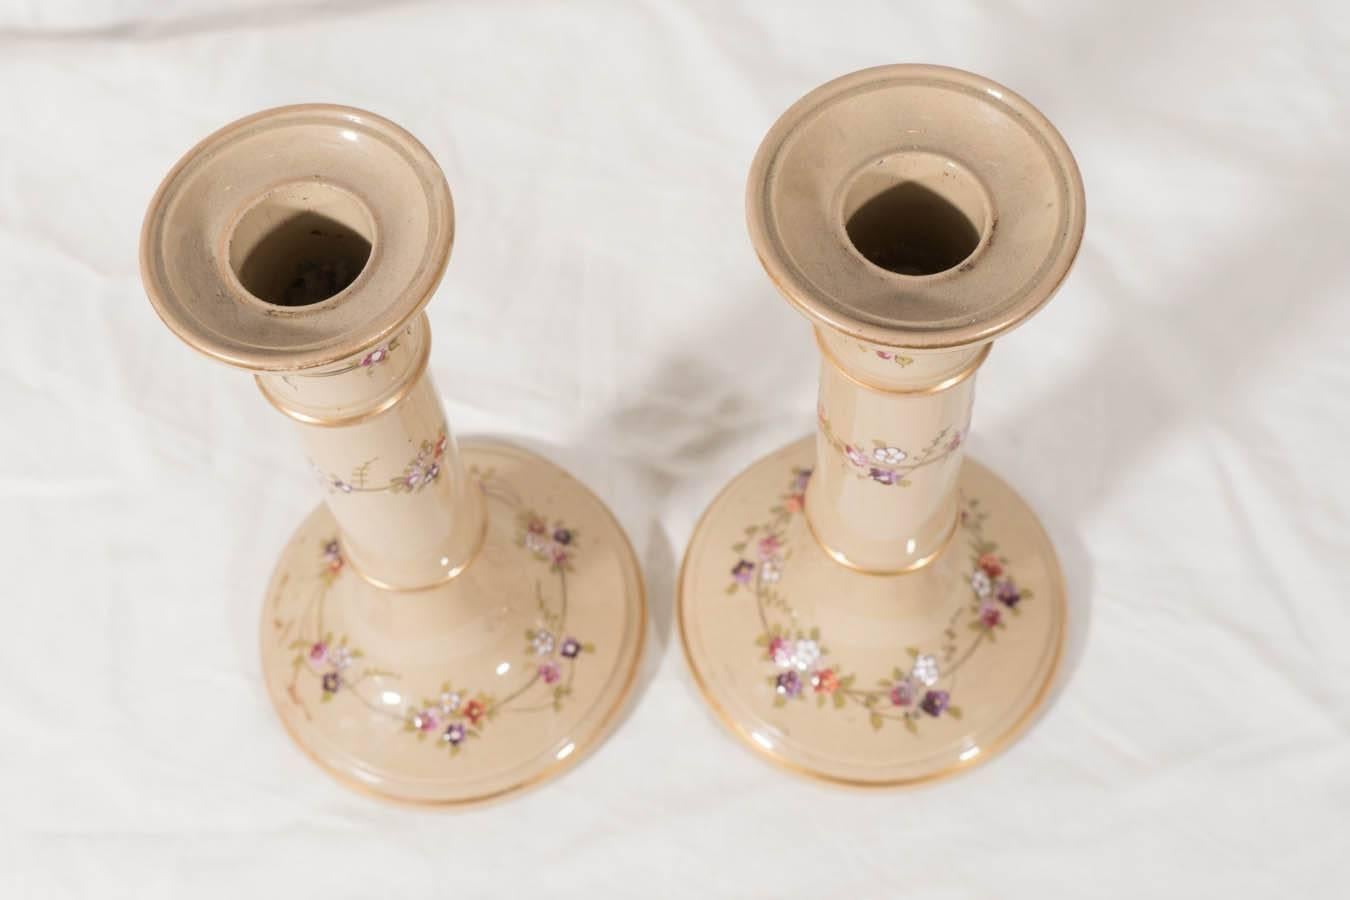 A pair of charming drabware candlesticks painted with delicate bands of small flowers and bands of gilt on a beige ground.
Dimensions: 7,25 inches tall x 3.75 inches diameter at the base
Condition: Excellent
Price: $280
Background:
Drabware was